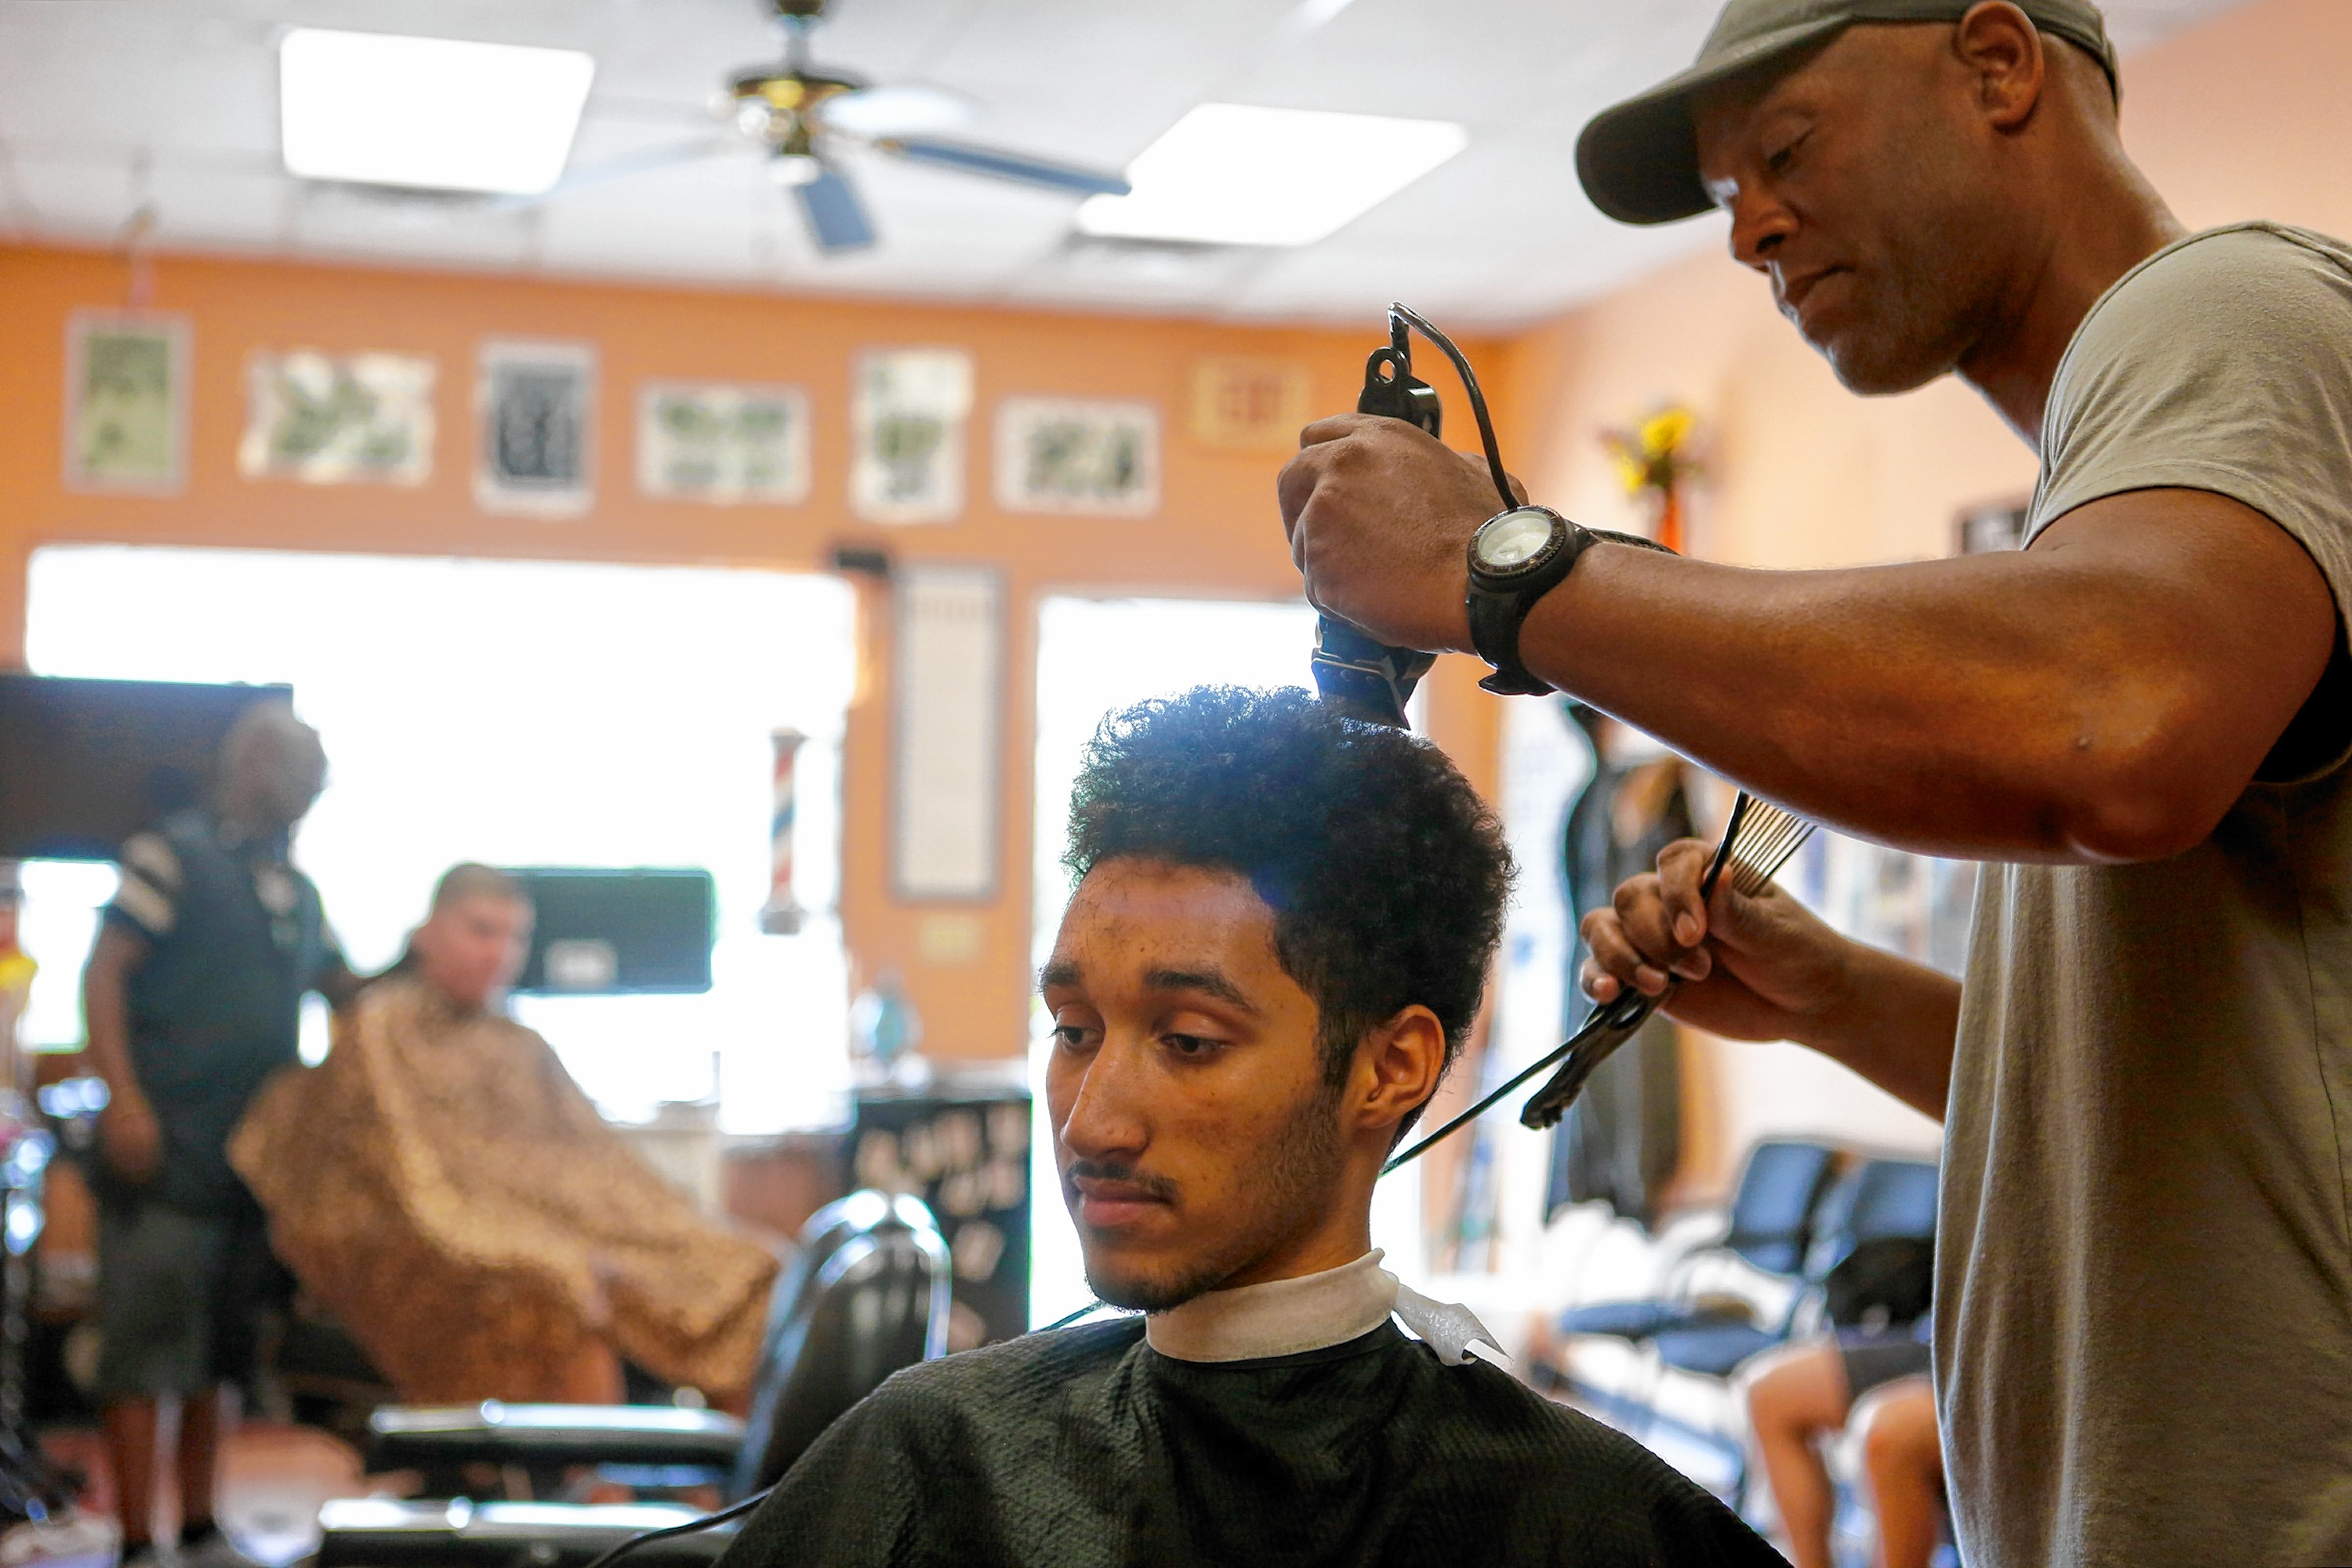 Expressing a love for humanity through cutting hair in Amherst